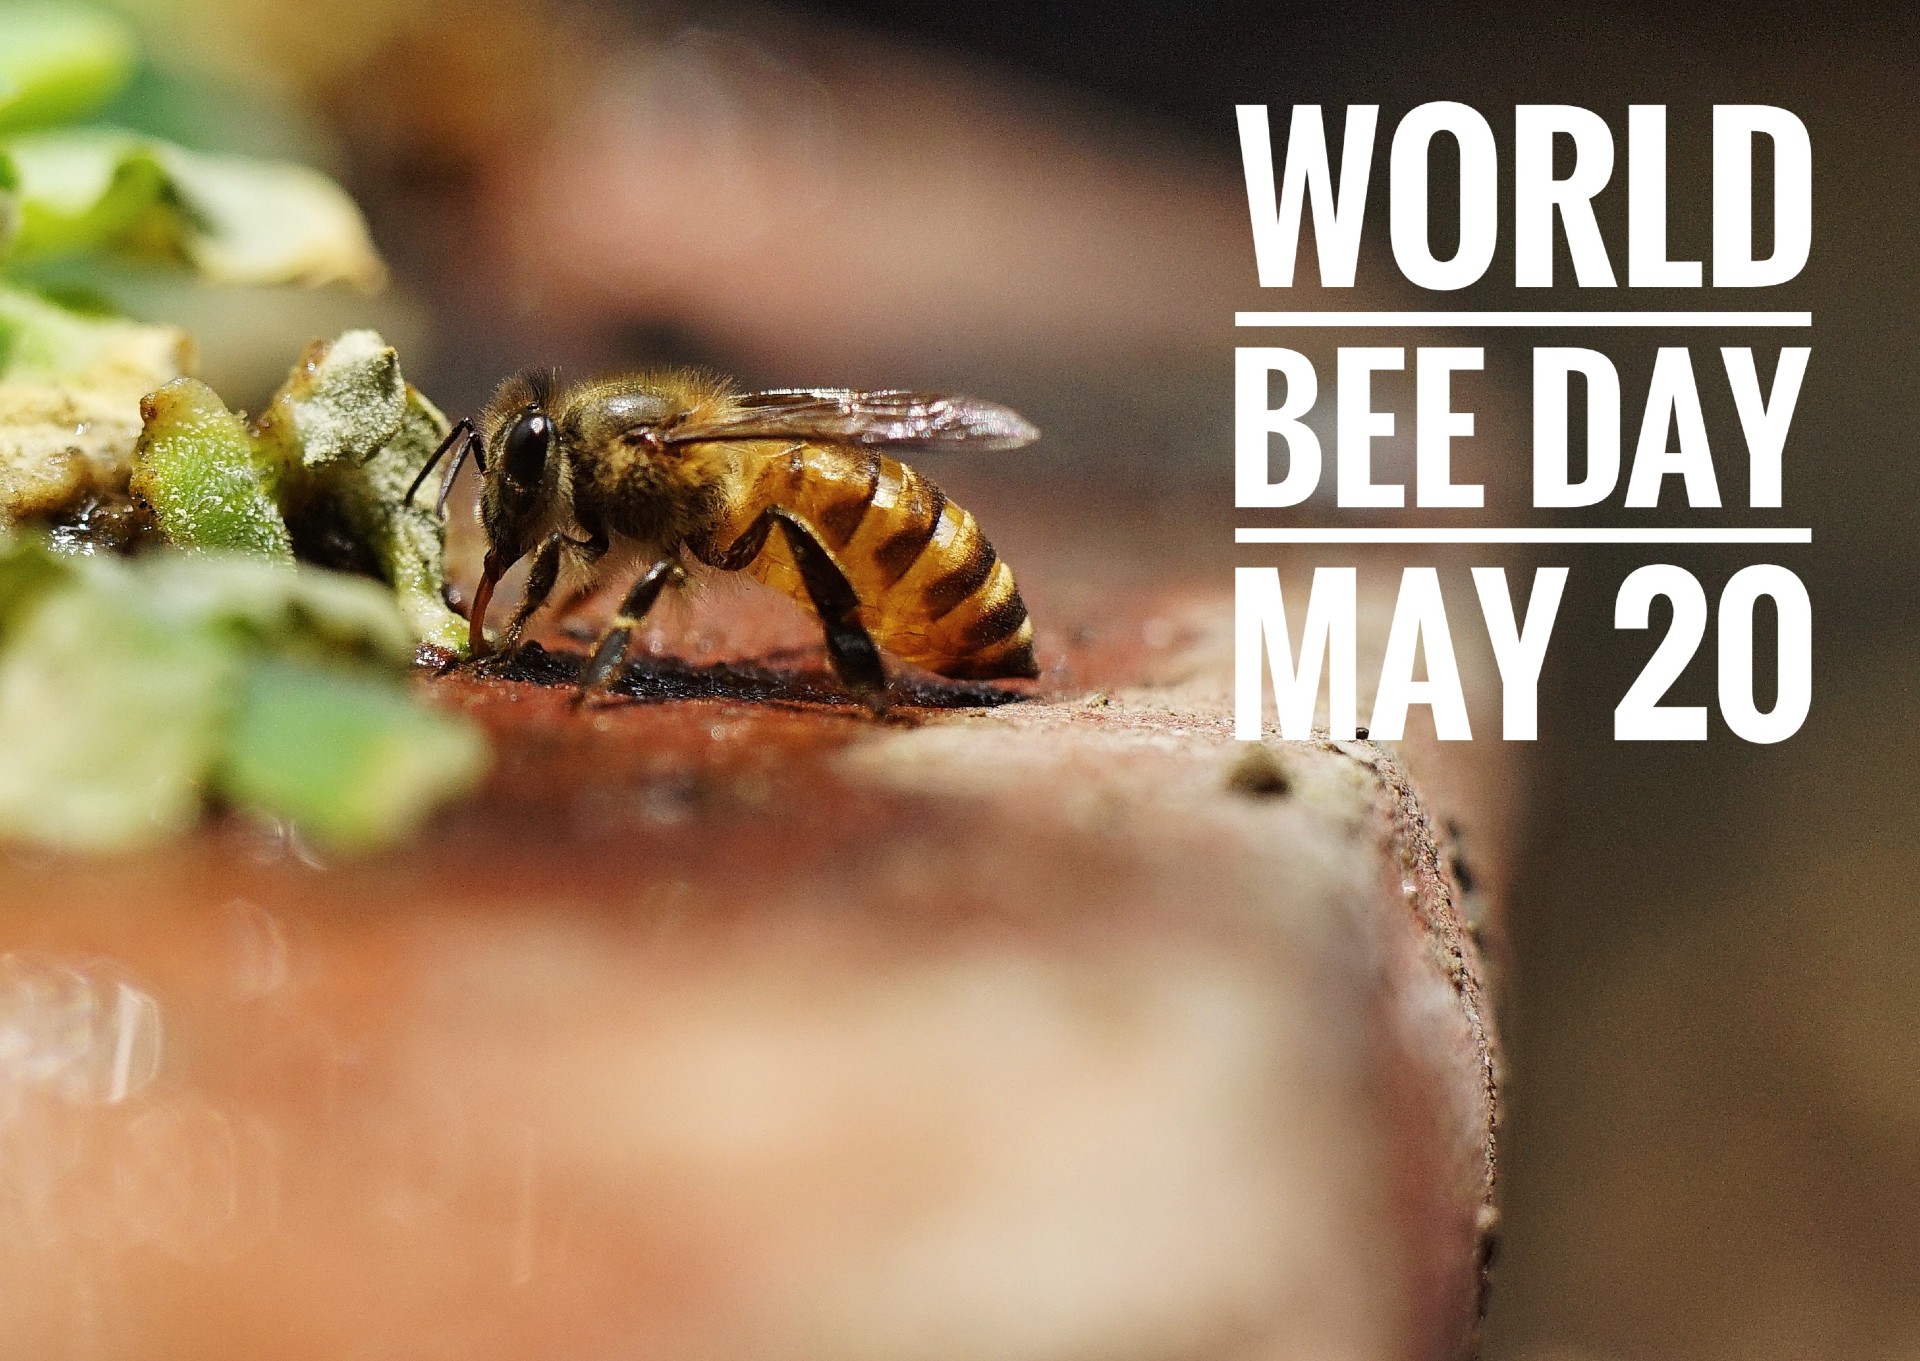 Honoring Our Pollinators on World Bee Day Live Bee Removal